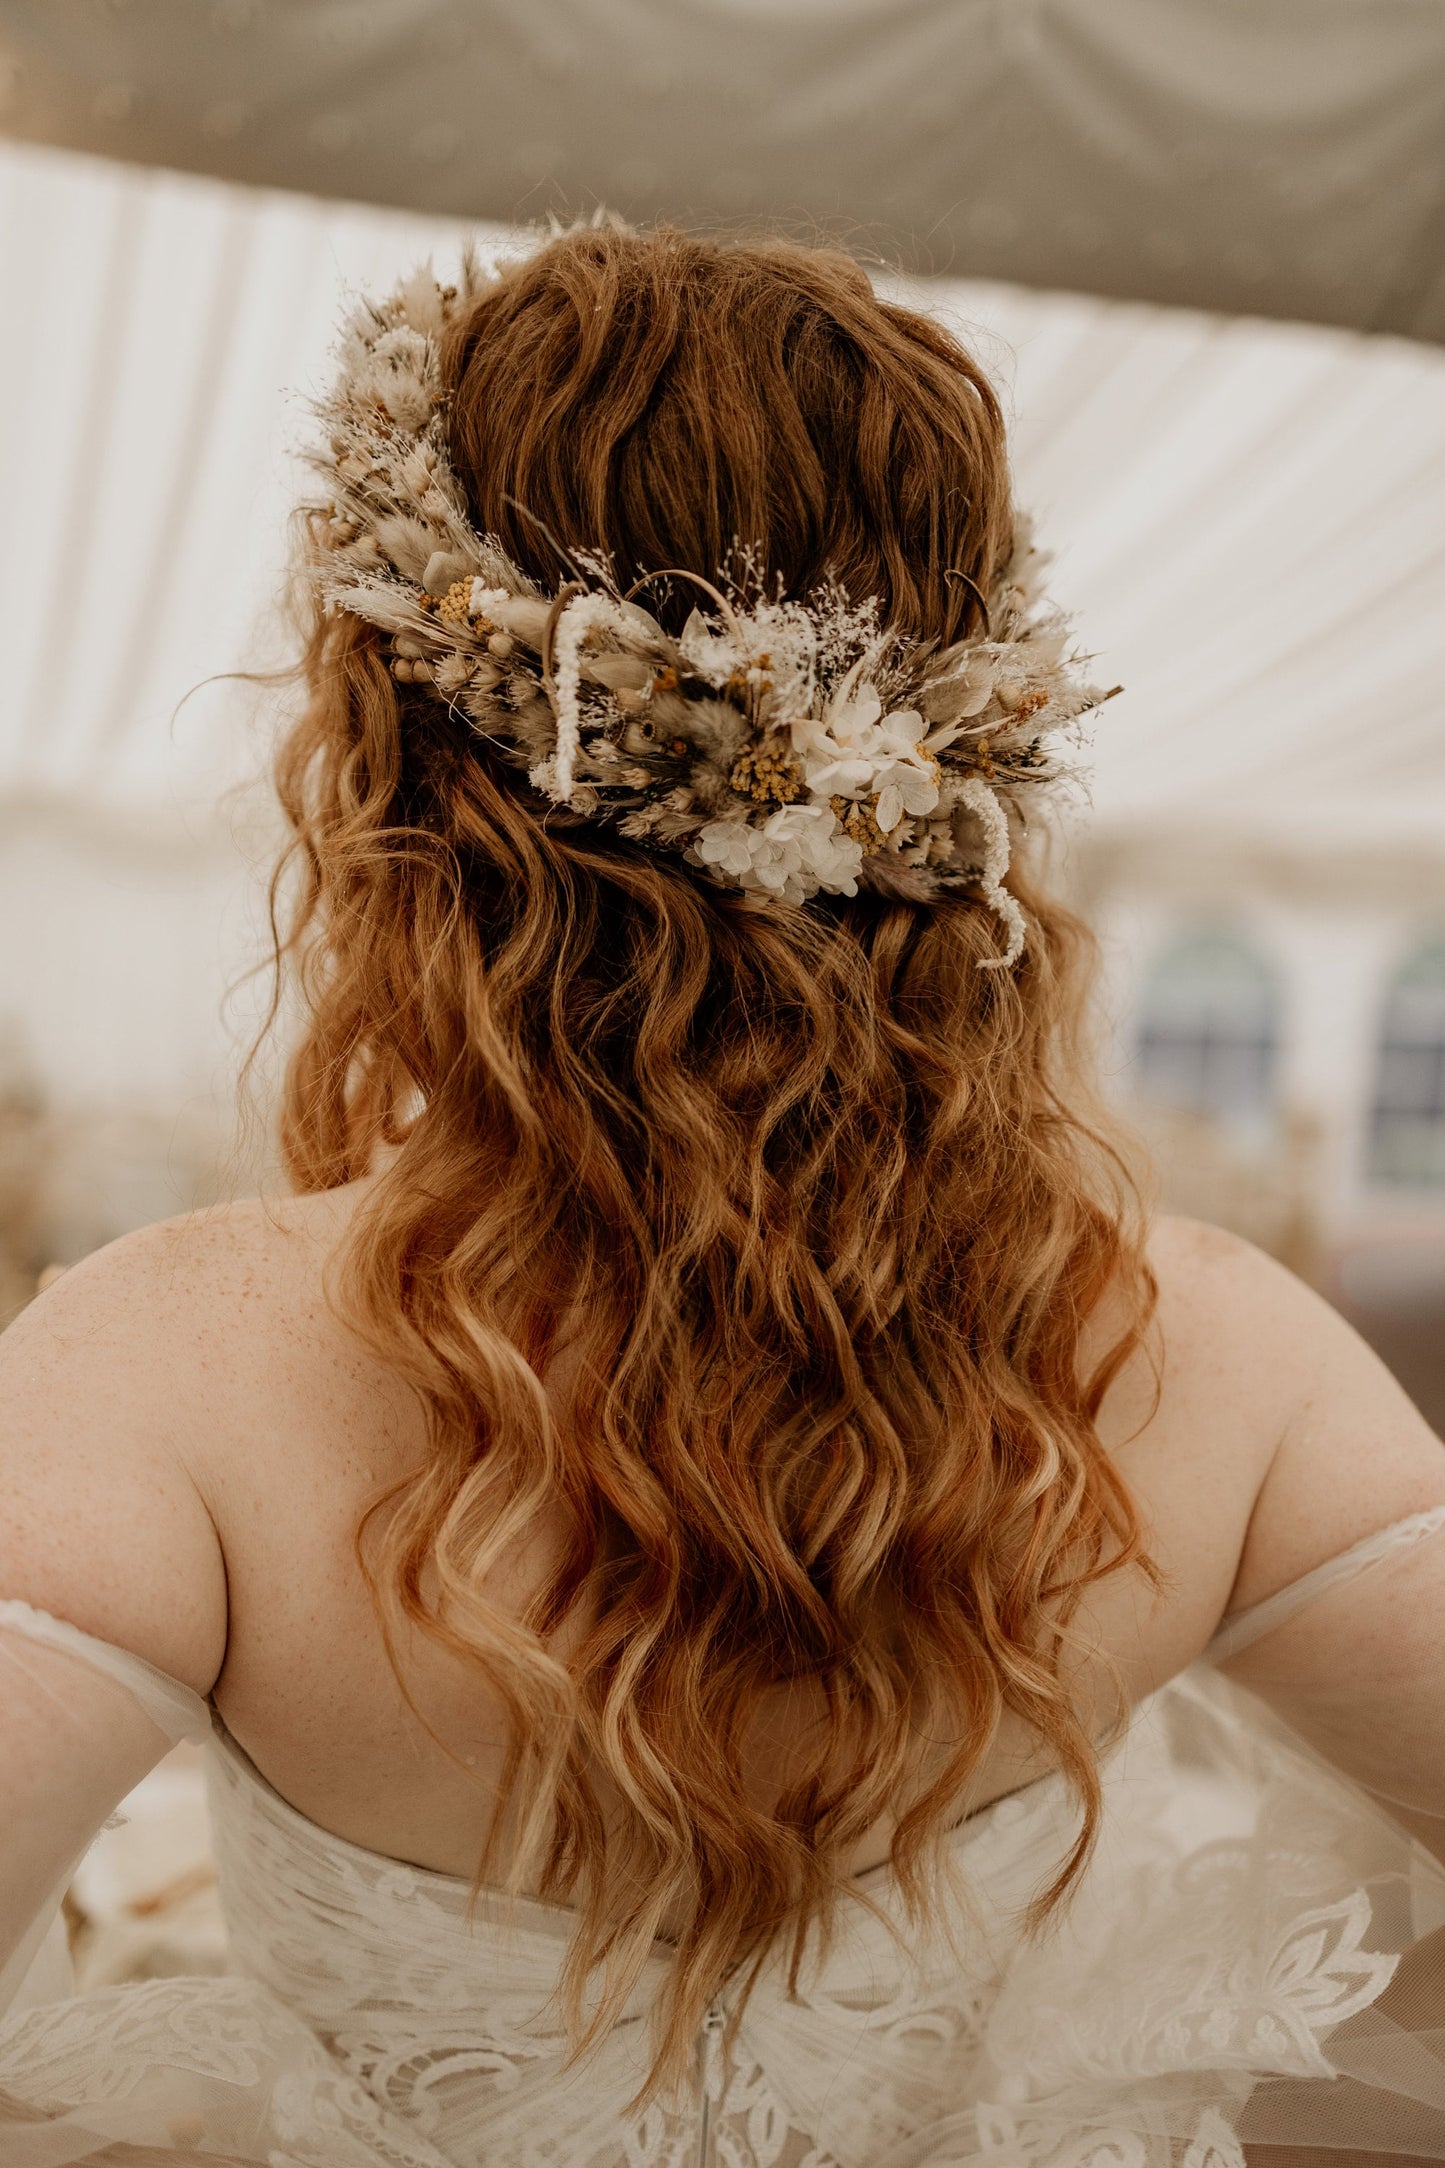 Large dried flower full crown